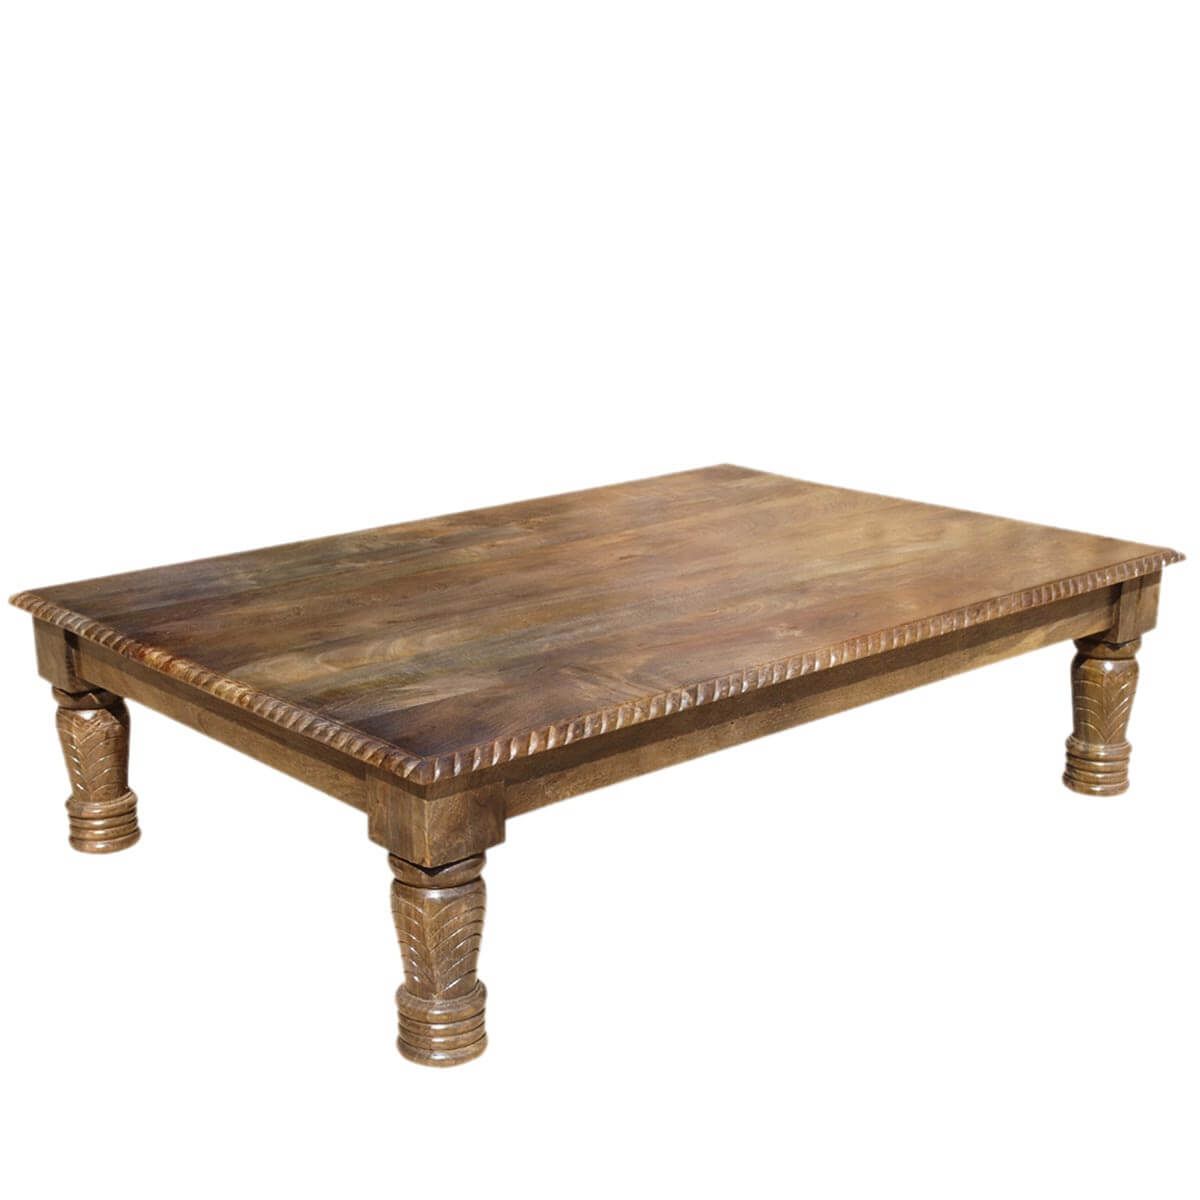 Solid Wood Hand Carved Transitional Lincoln Coffee Table Intended For Wooden Hand Carved Coffee Tables (View 3 of 20)